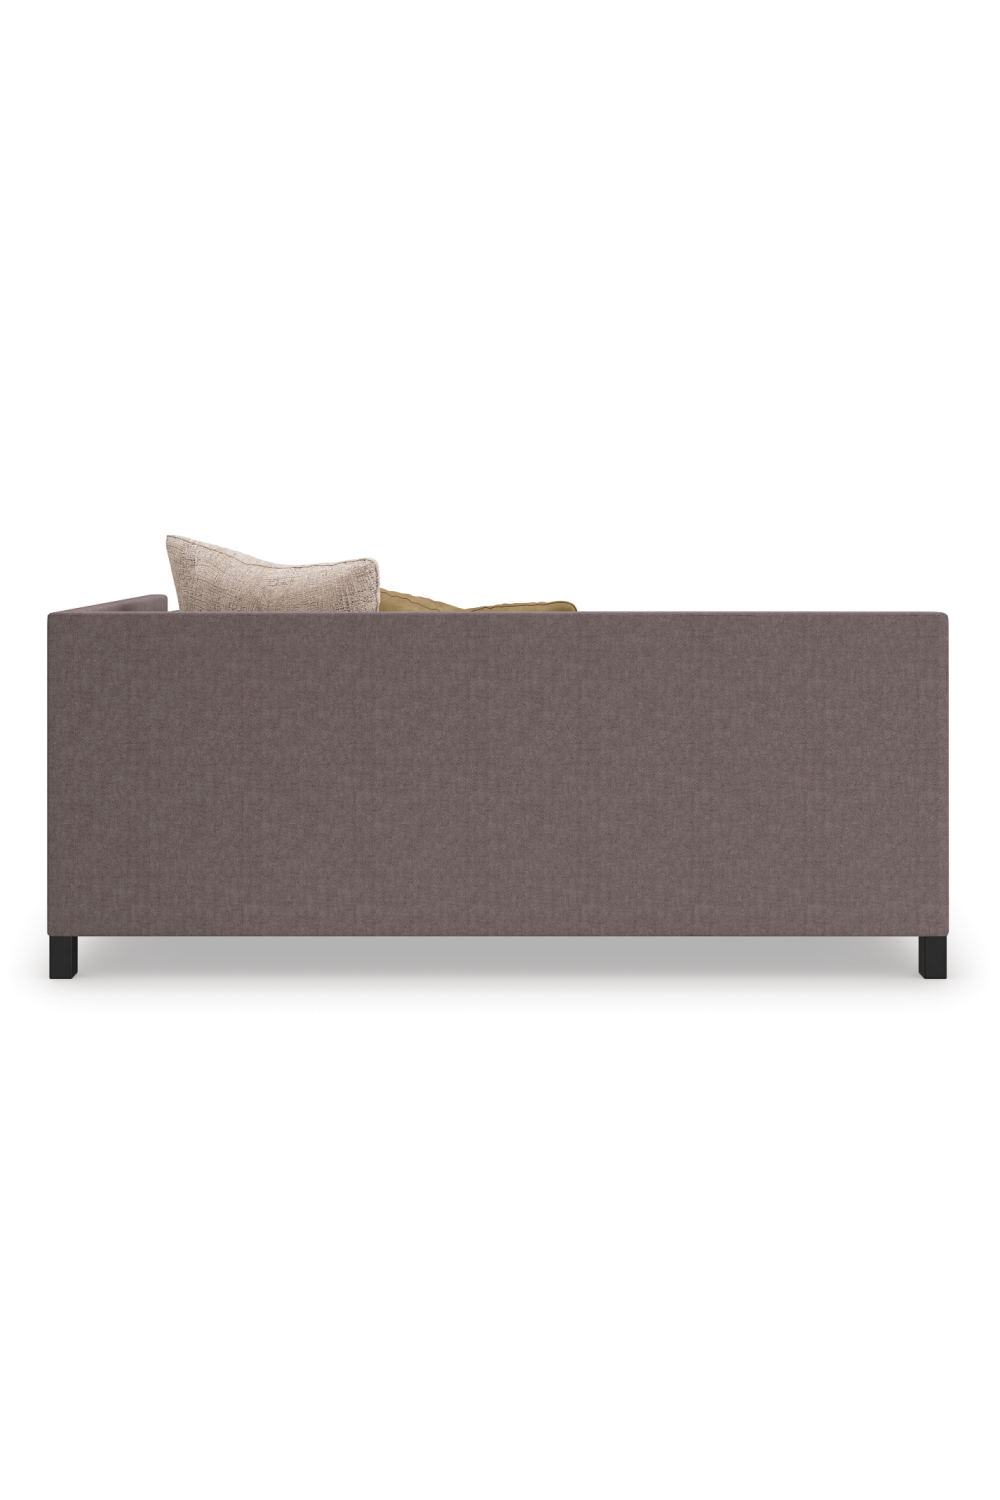 Brown Upholstered Sectional Chair | Caracole Tuxedo | Oroa.com